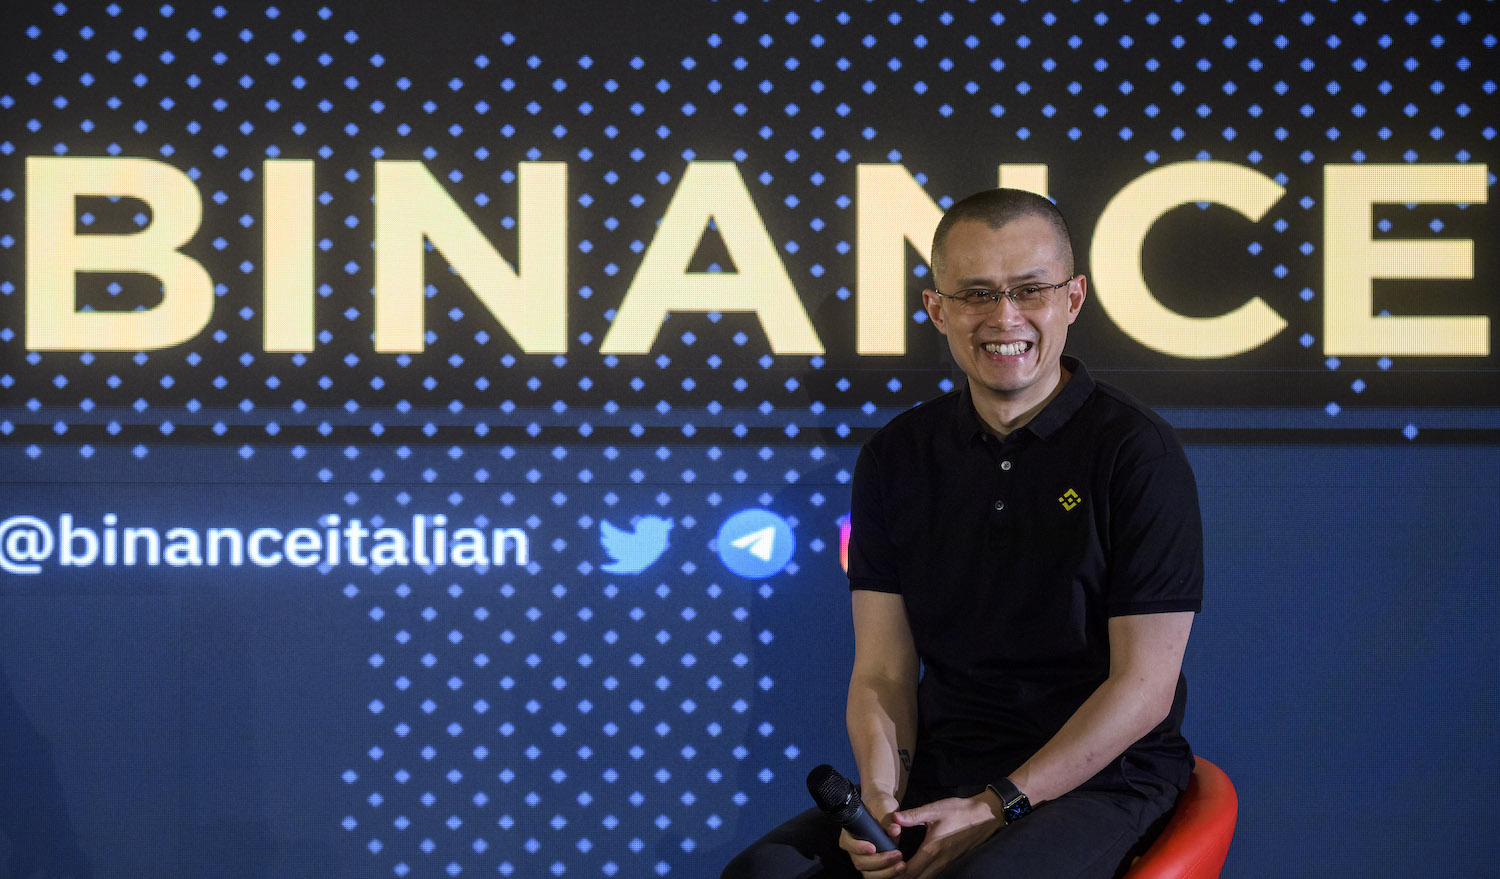 ROME, ITALY - MAY 10: Founder and CEO of Binance Changpeng Zhao, commonly known as "CZ", attends the "CZ meets Italy" at Palazzo Brancaccio on May 10, 2022 in Rome, Italy. Changpeng Zhao is the founder and CEO of Binance, the world's largest cryptocurrency exchange by trading volume as of April 2018. (Photo by Antonio Masiello/Getty Images)